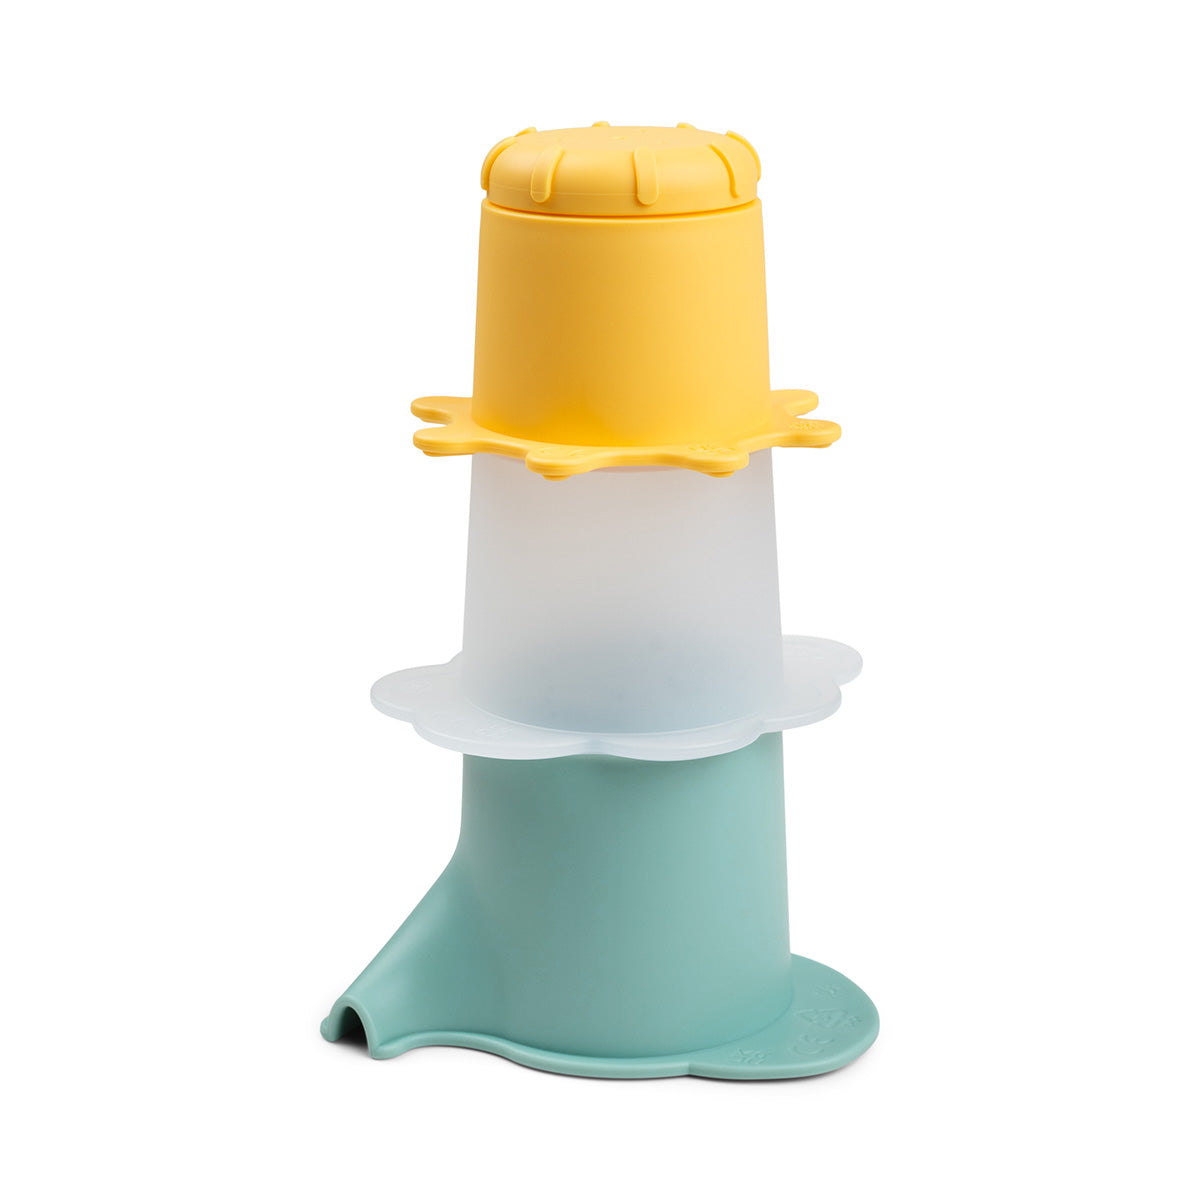 Water play & stacking cups 3 pcs - Elphee - Colour mix